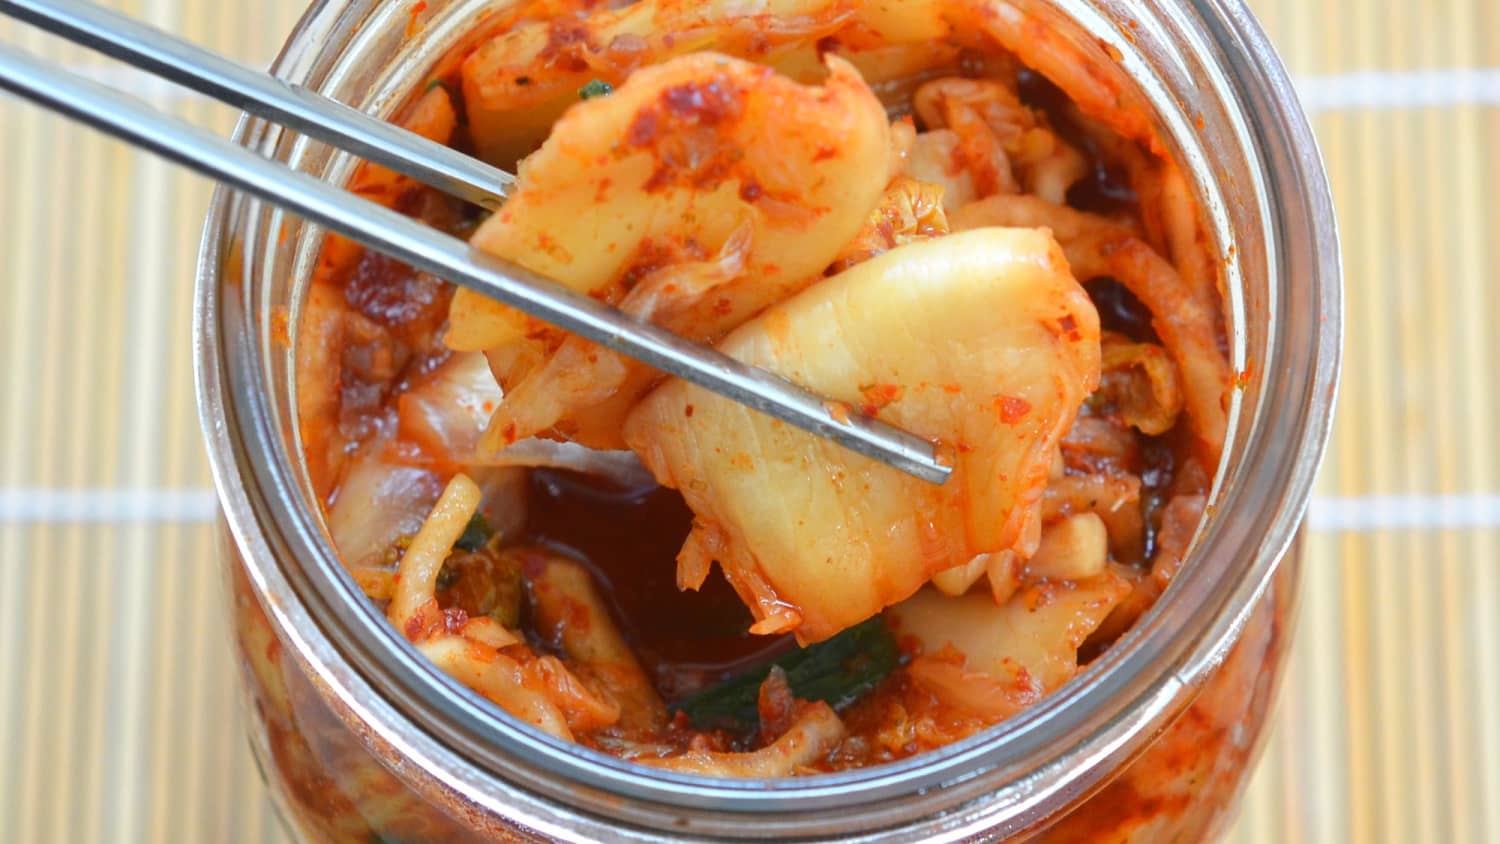 Recall on Kimchi in BC. Warnings of E. Coli.